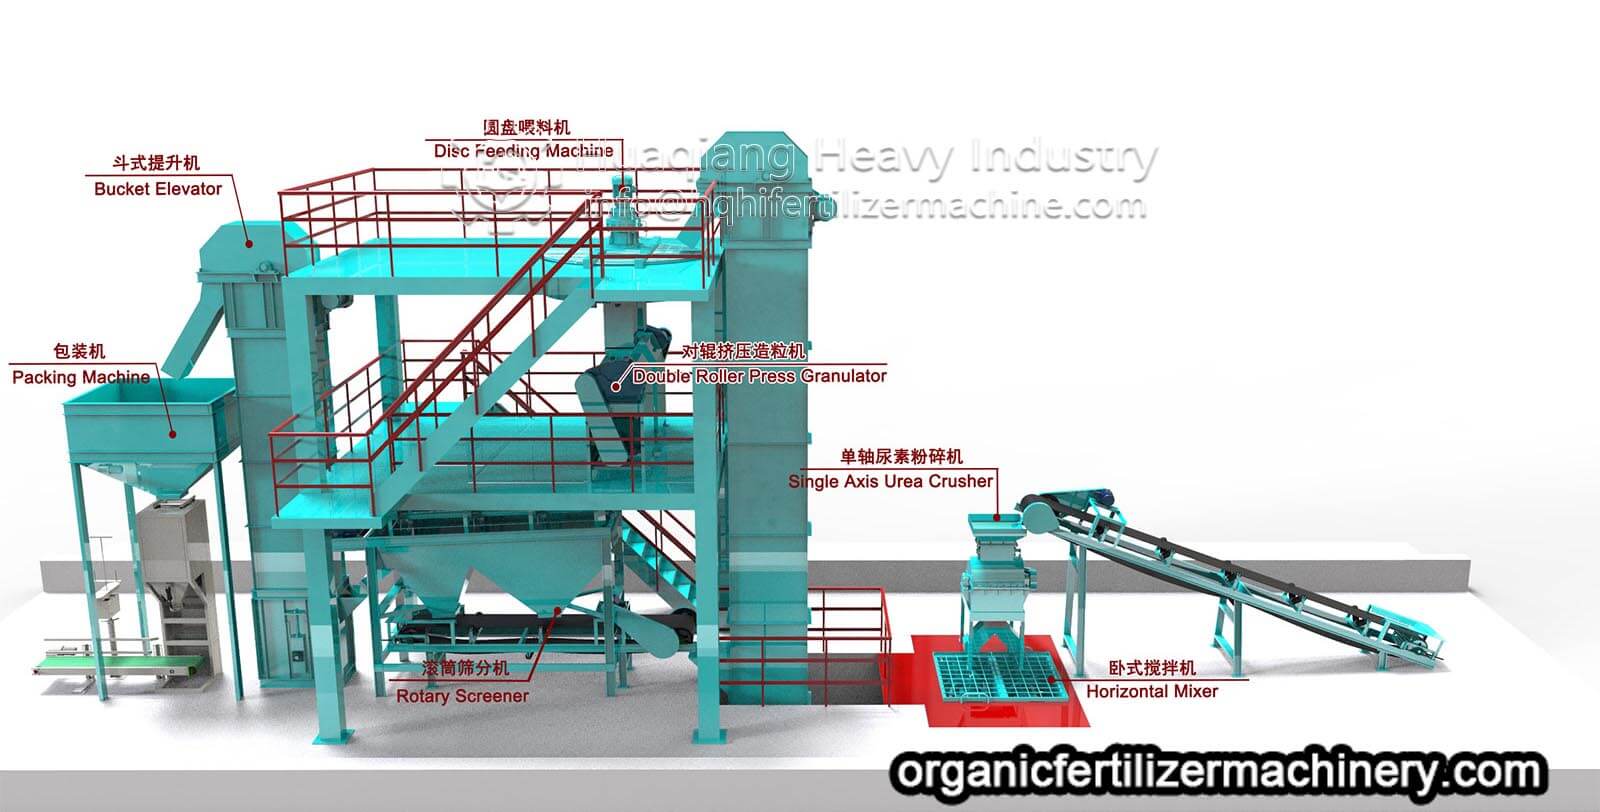 Production technology of organic fertilizer by double roller granulation